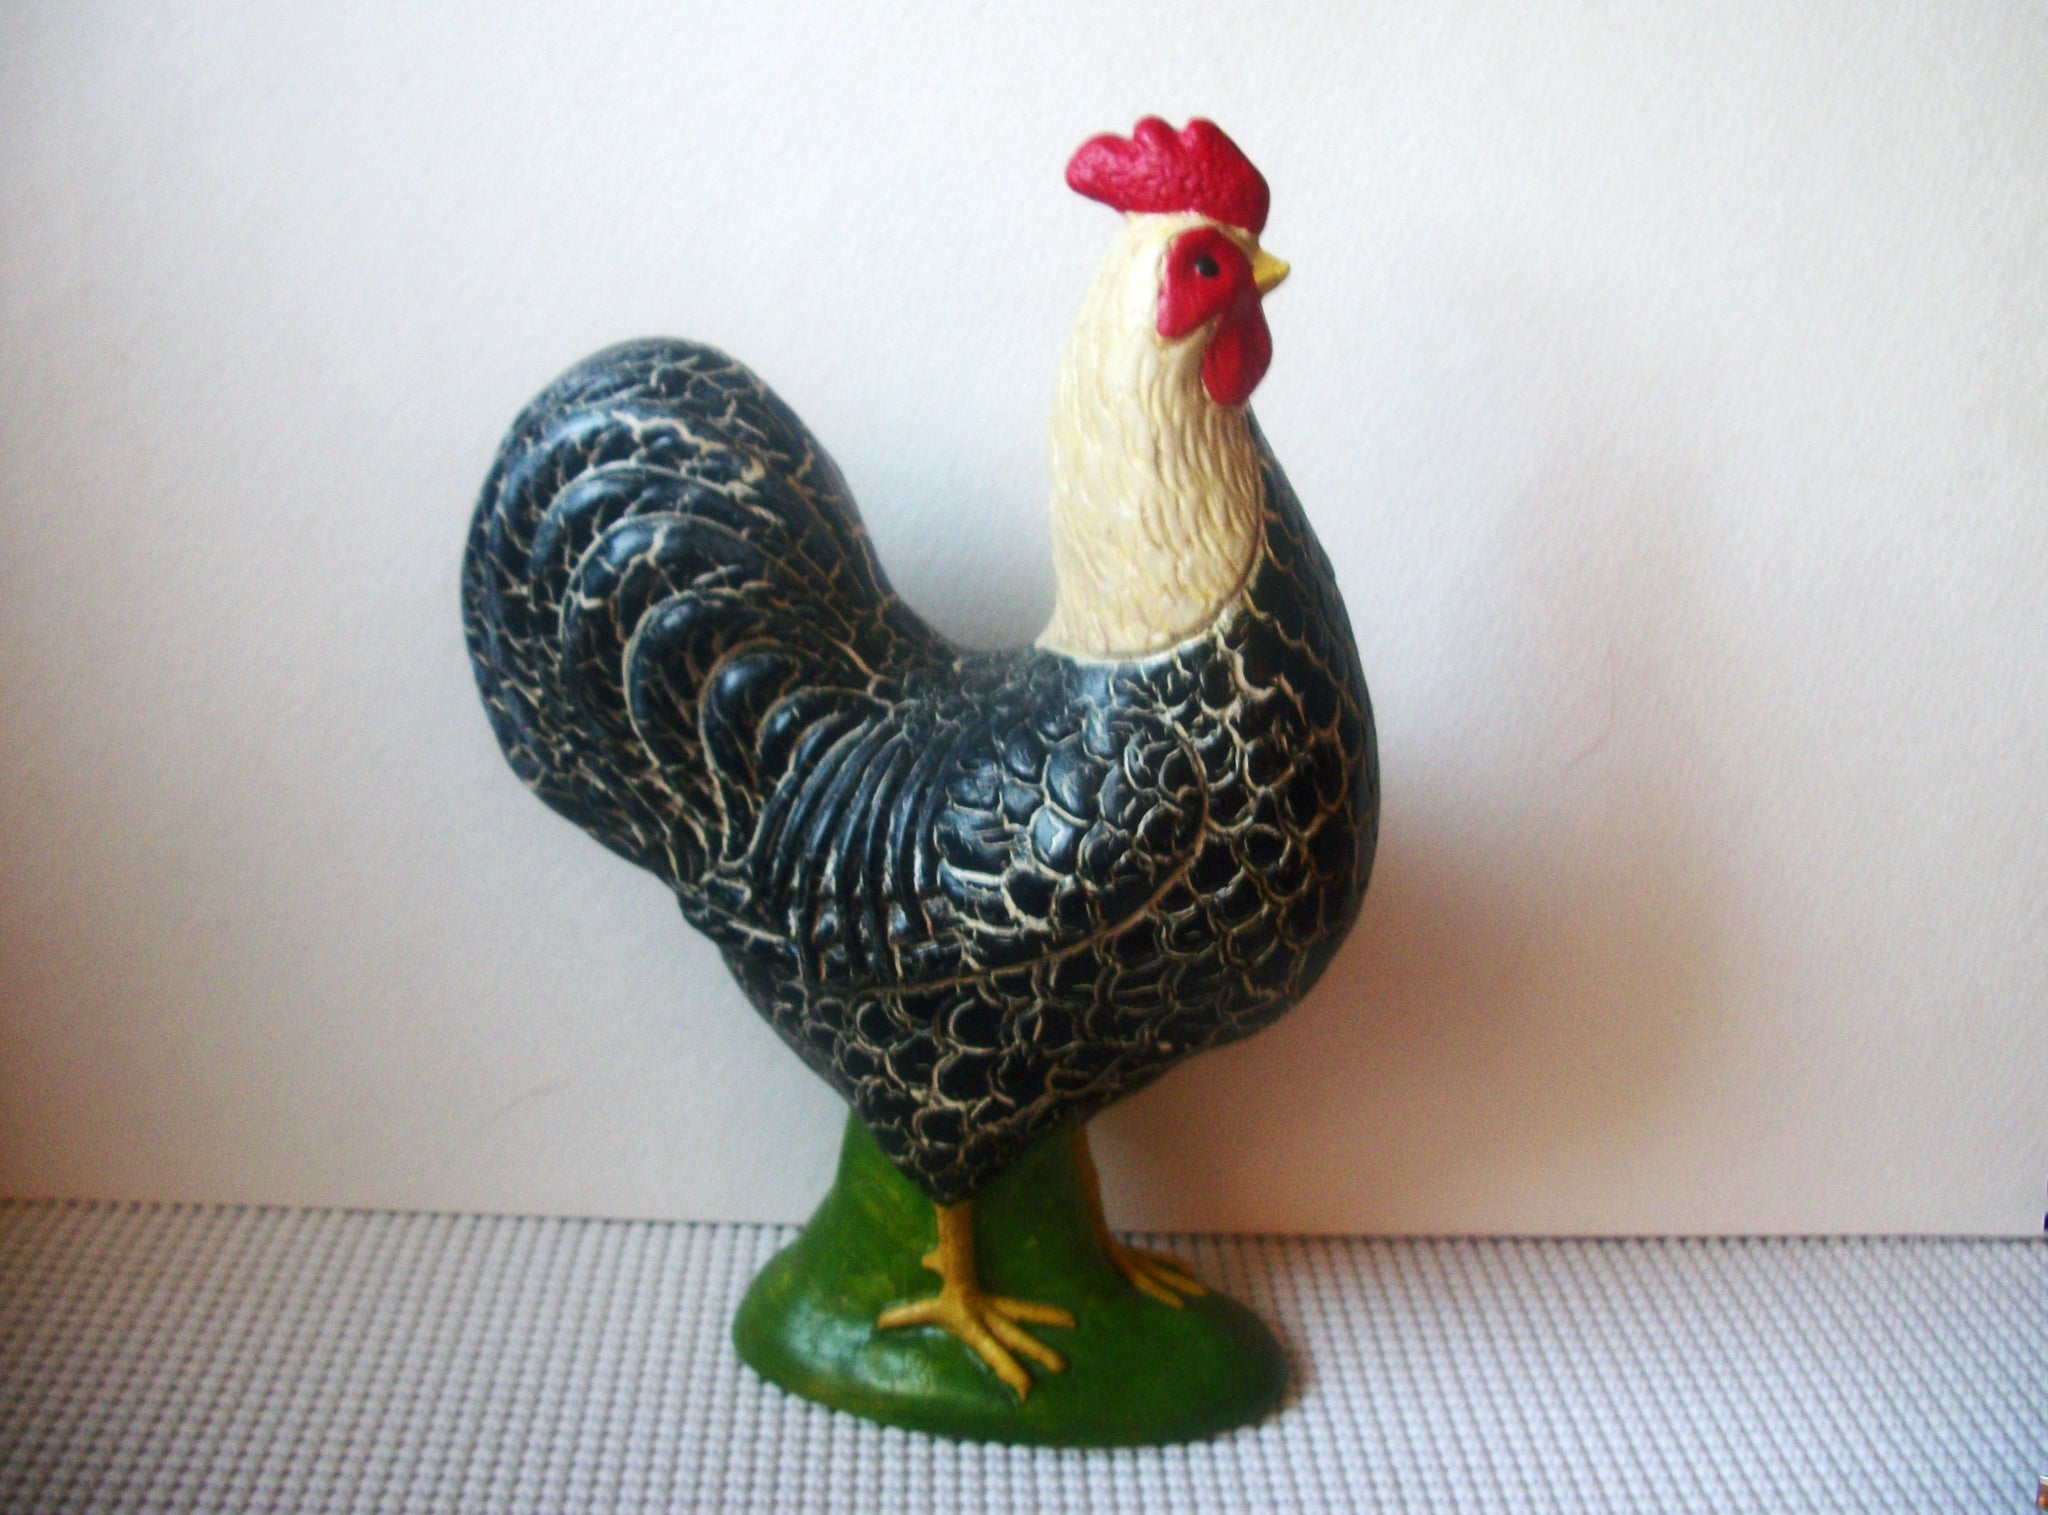 Rustic Vintage Rooster, Tall and Hand Crafted, From Resin